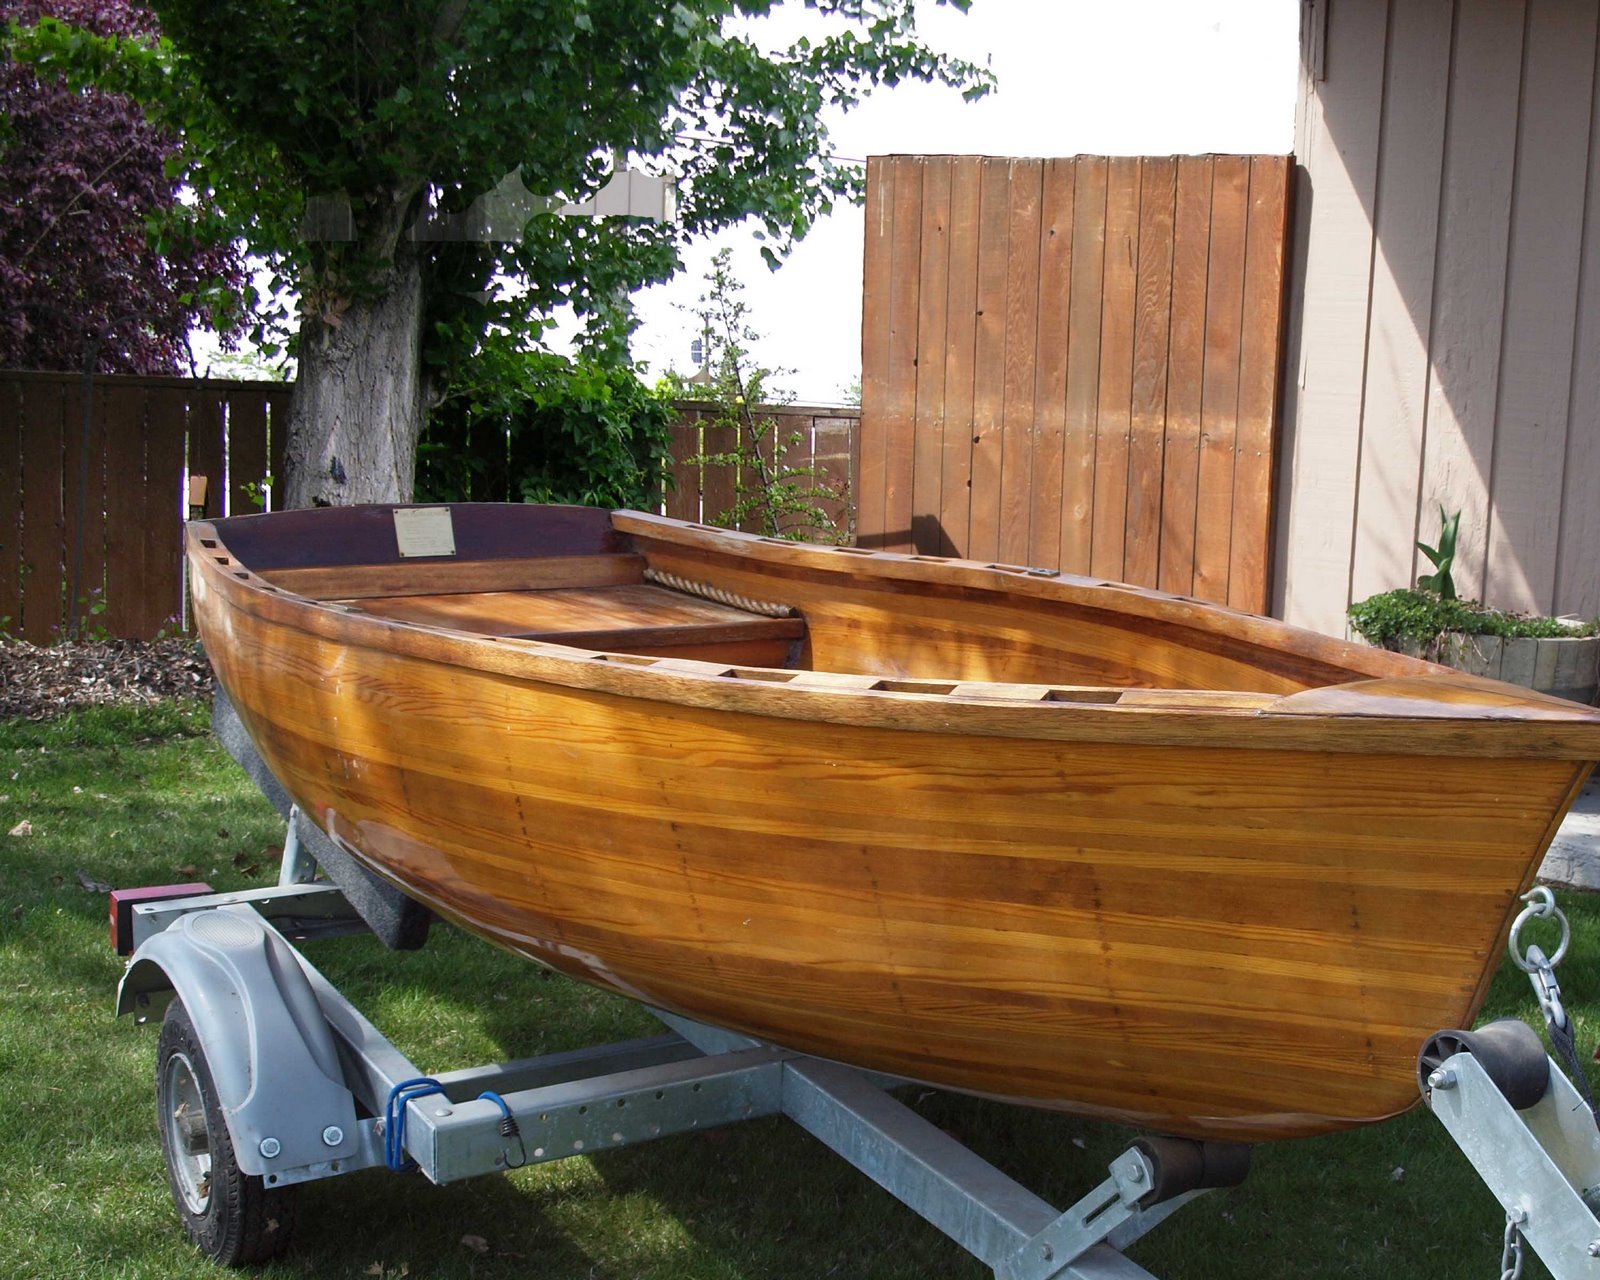 Jay: Wooden Rowing Boat Diy Kits For Sale How to Building ...